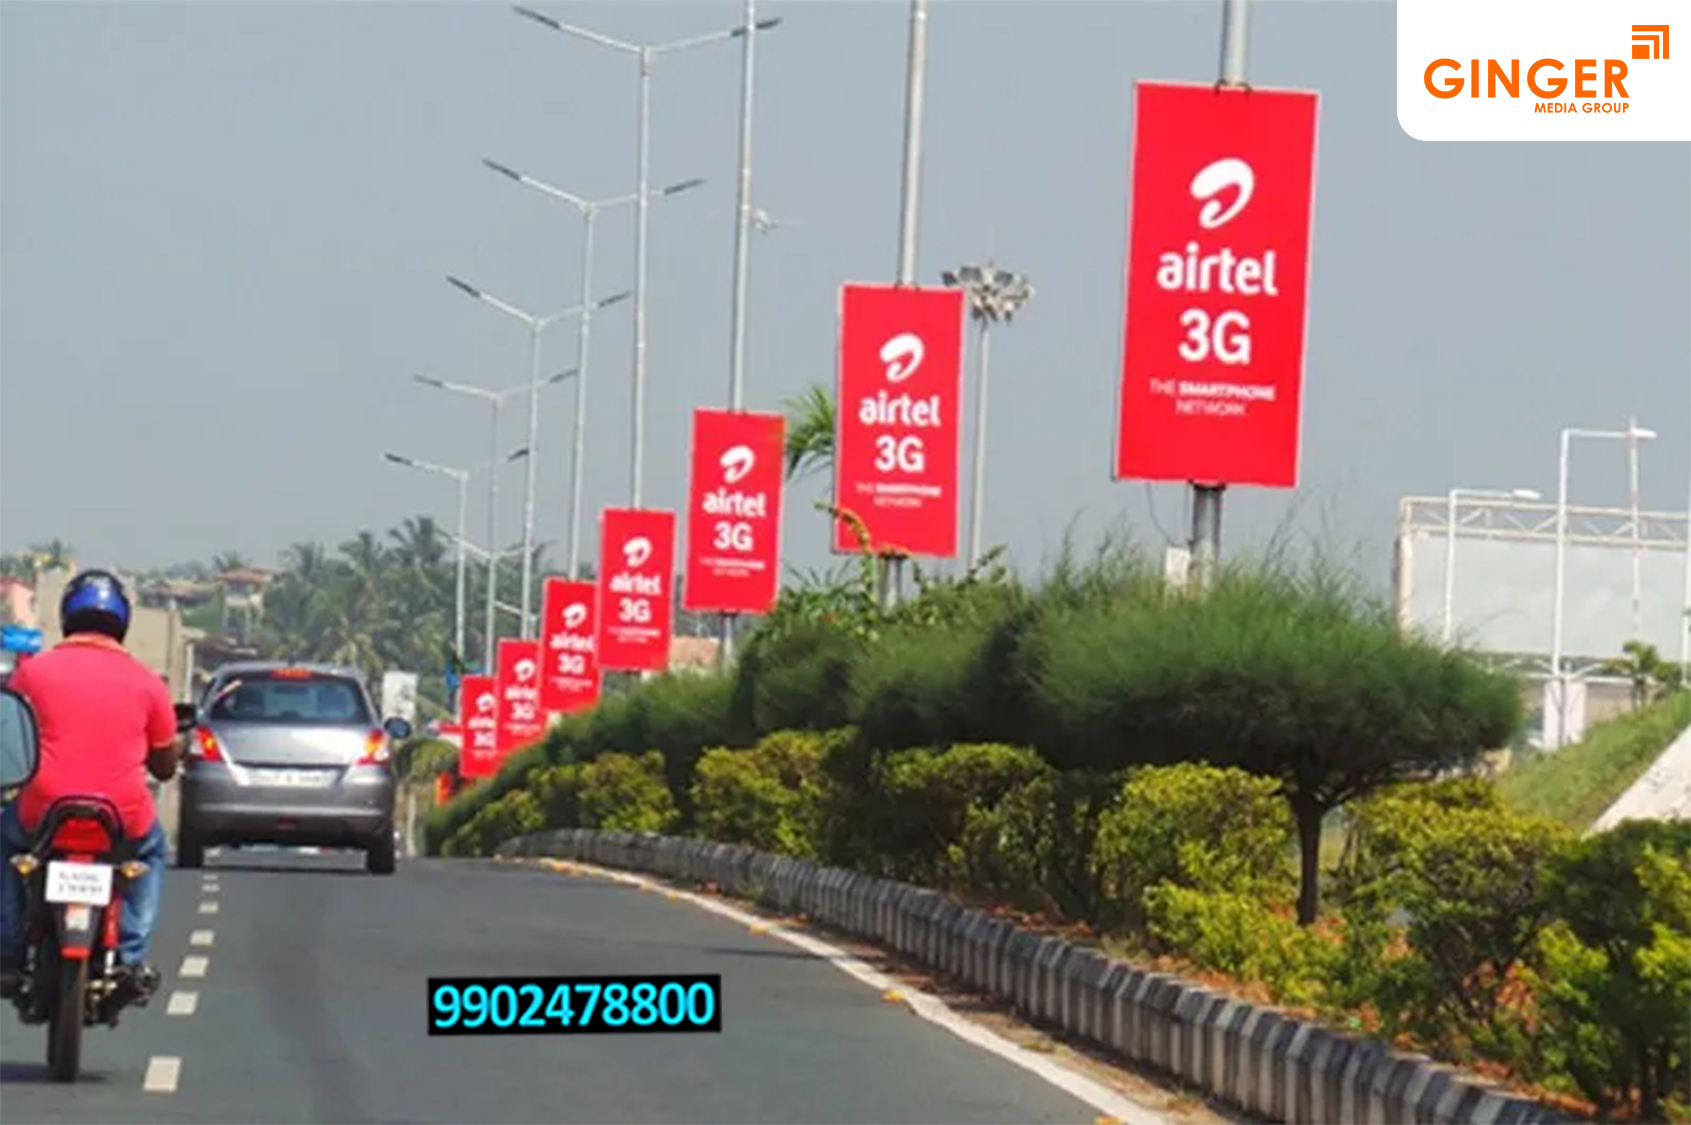 airtel 3G of Pole Board advertising done in India